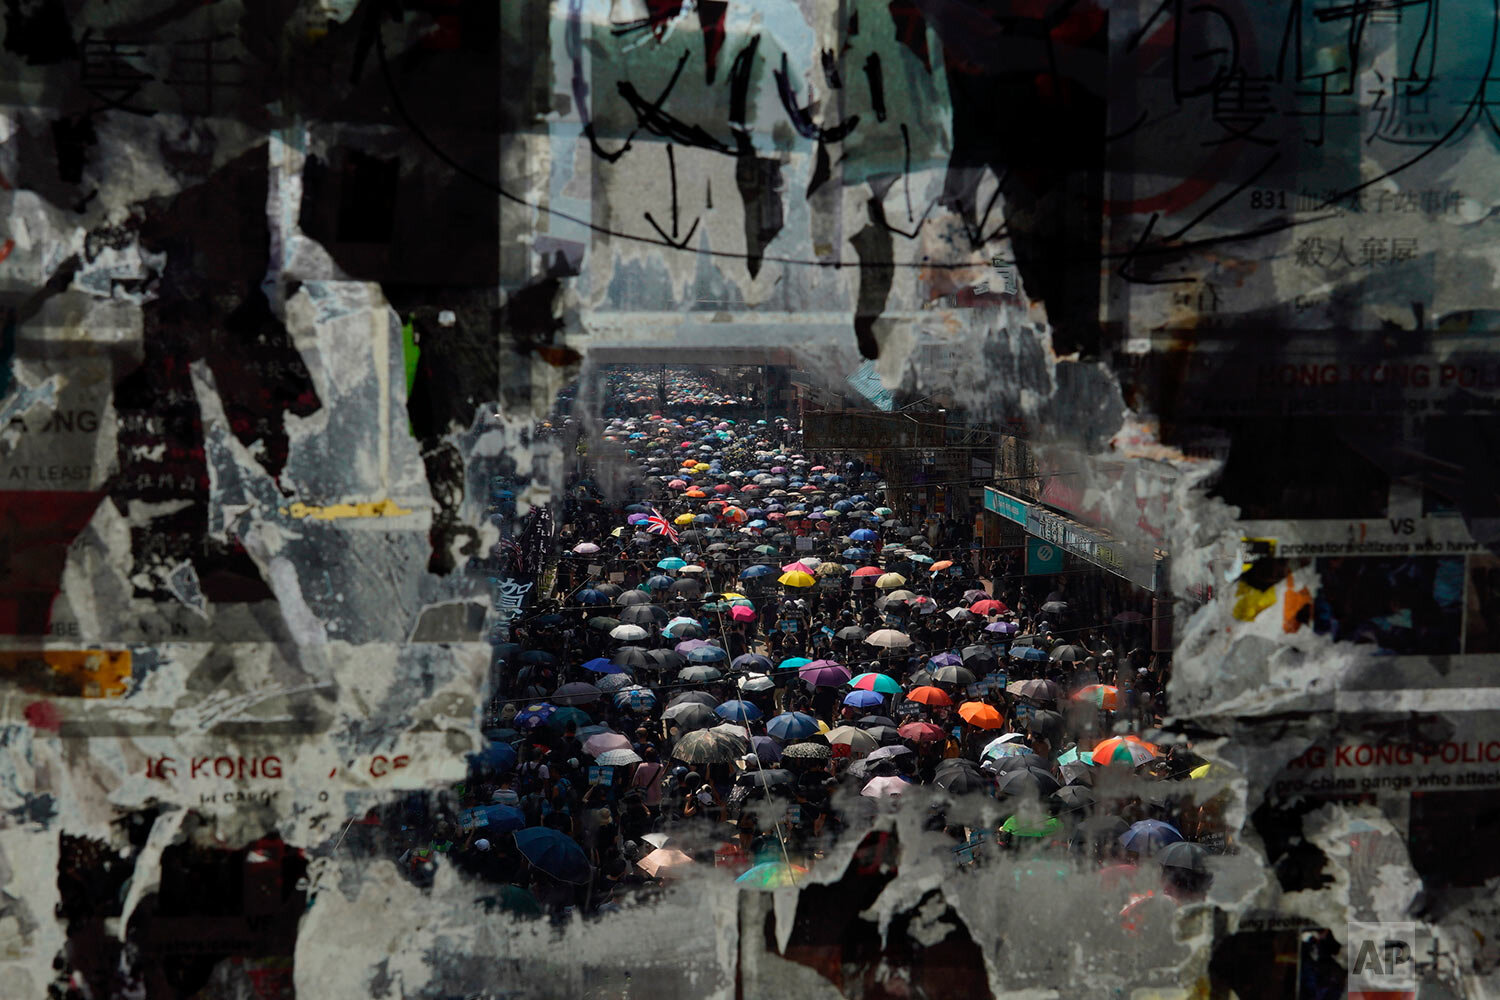  Marching anti-government protesters are seen through a window with peeled off posters in Hong Kong on Oct. 1, 2019. (AP Photo/Vincent Yu) 